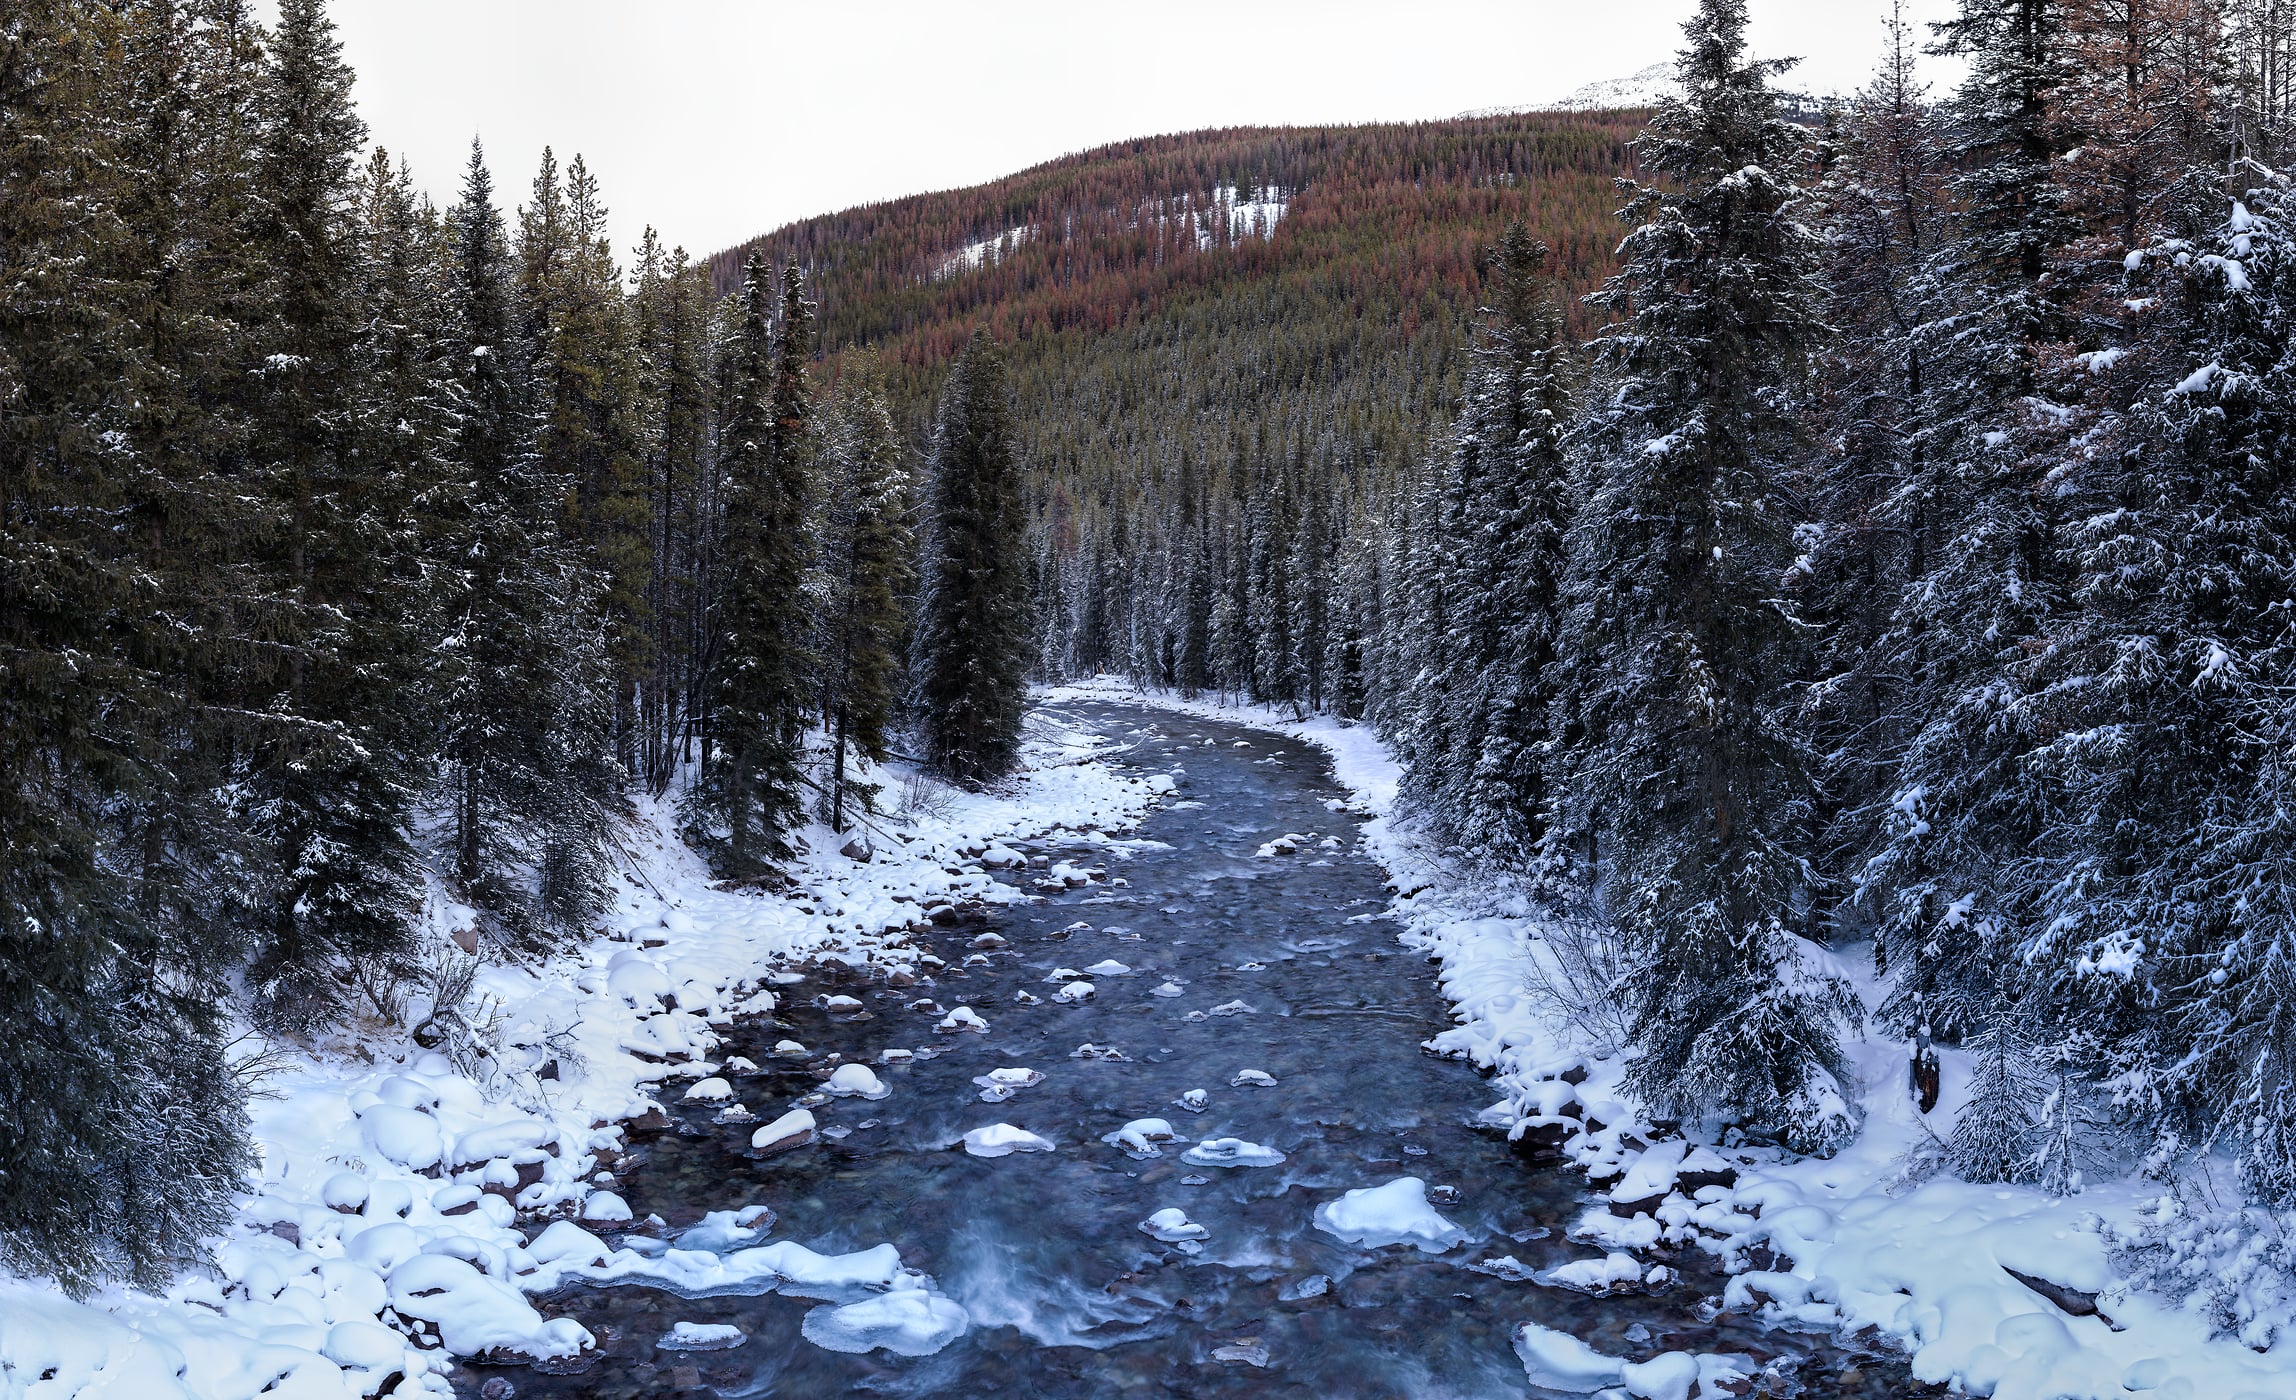 1,295 megapixels! A very high resolution, large-format VAST photo print of winter scene of a river with snow and evergreen trees; nature photograph created by Scott Dimond in Jasper National Park, Alberta, Canada.